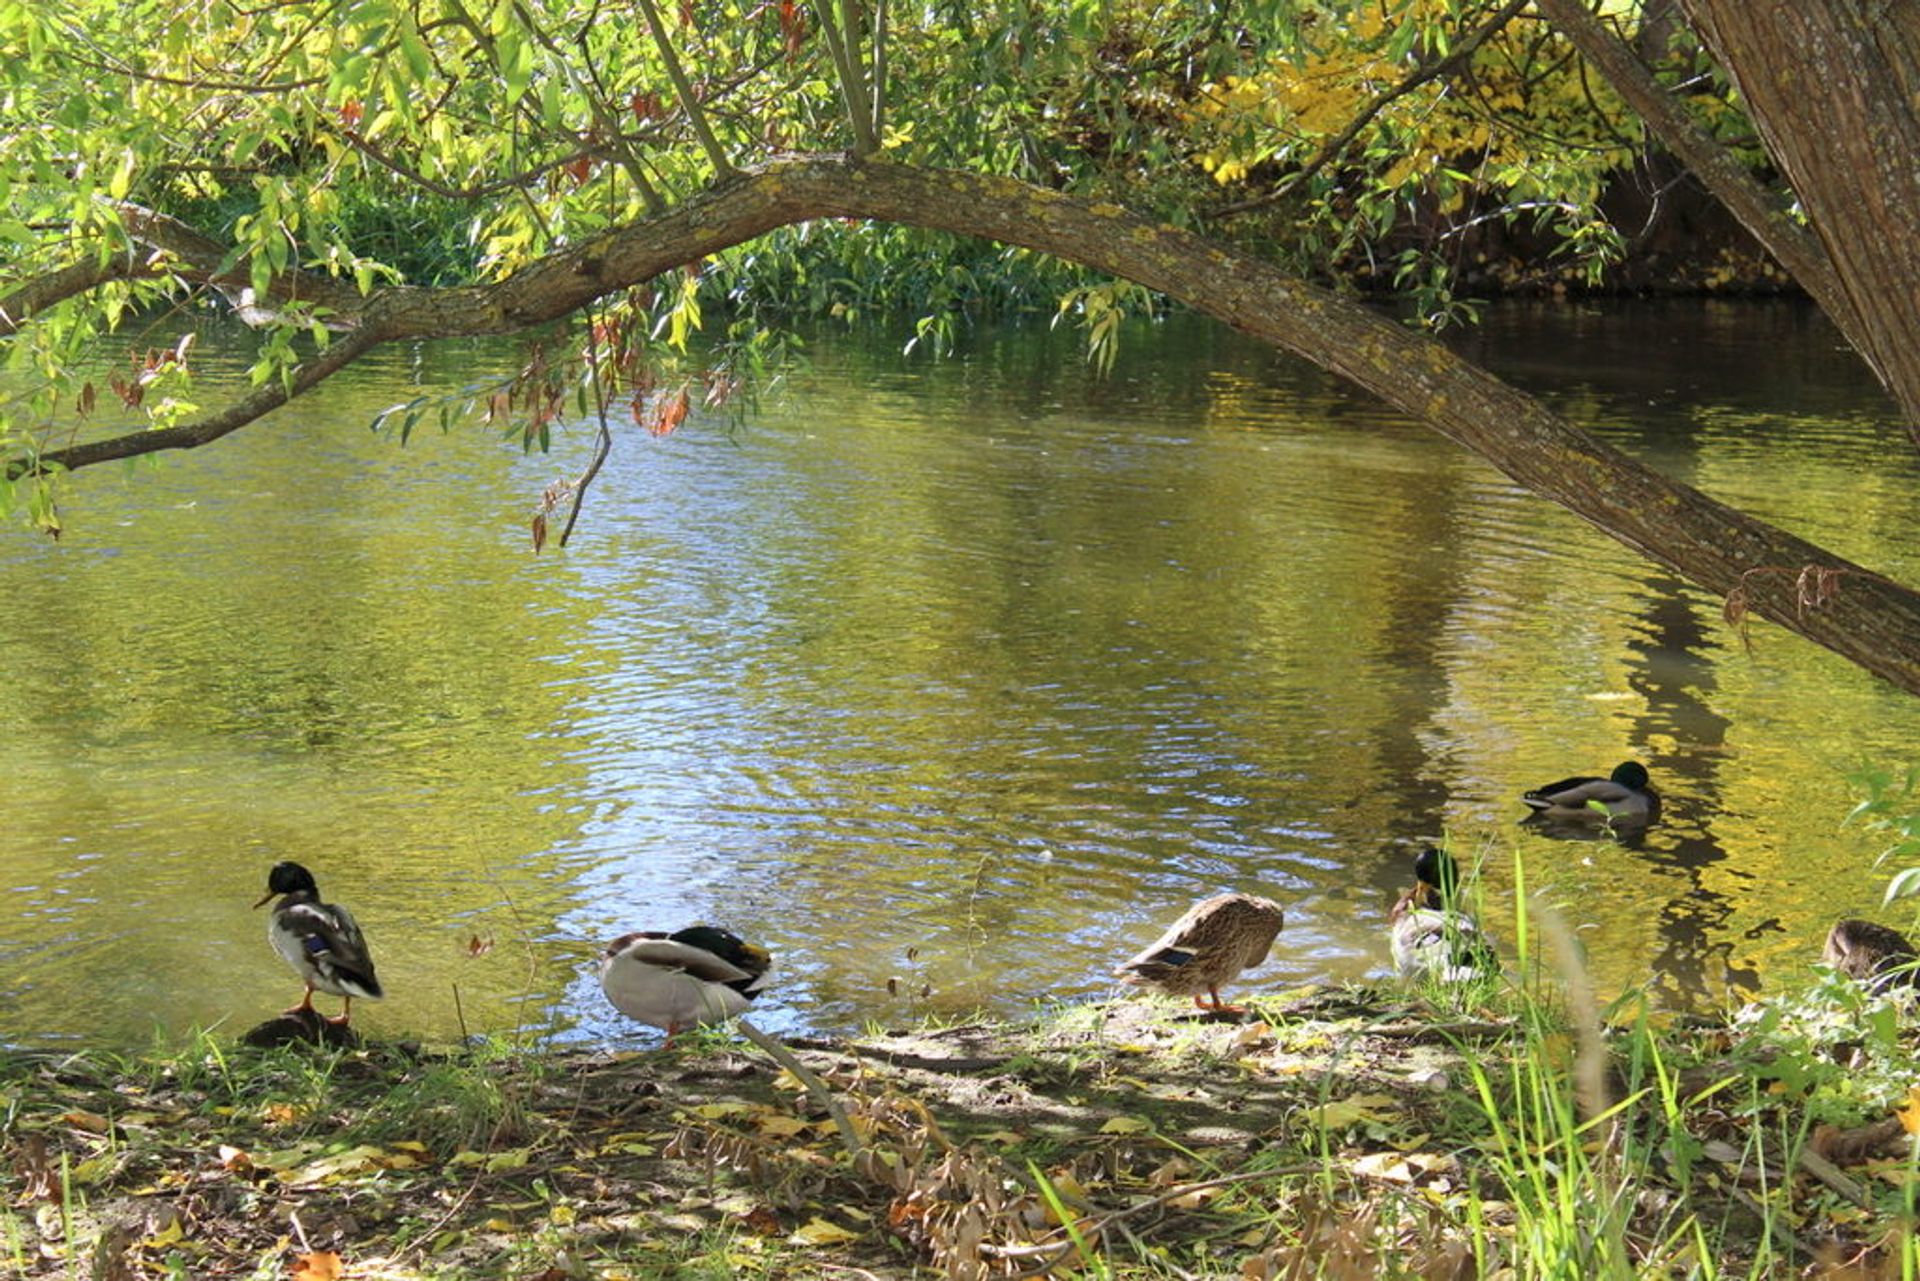 The shoreline at a river with a few ducks enjoying the sun.